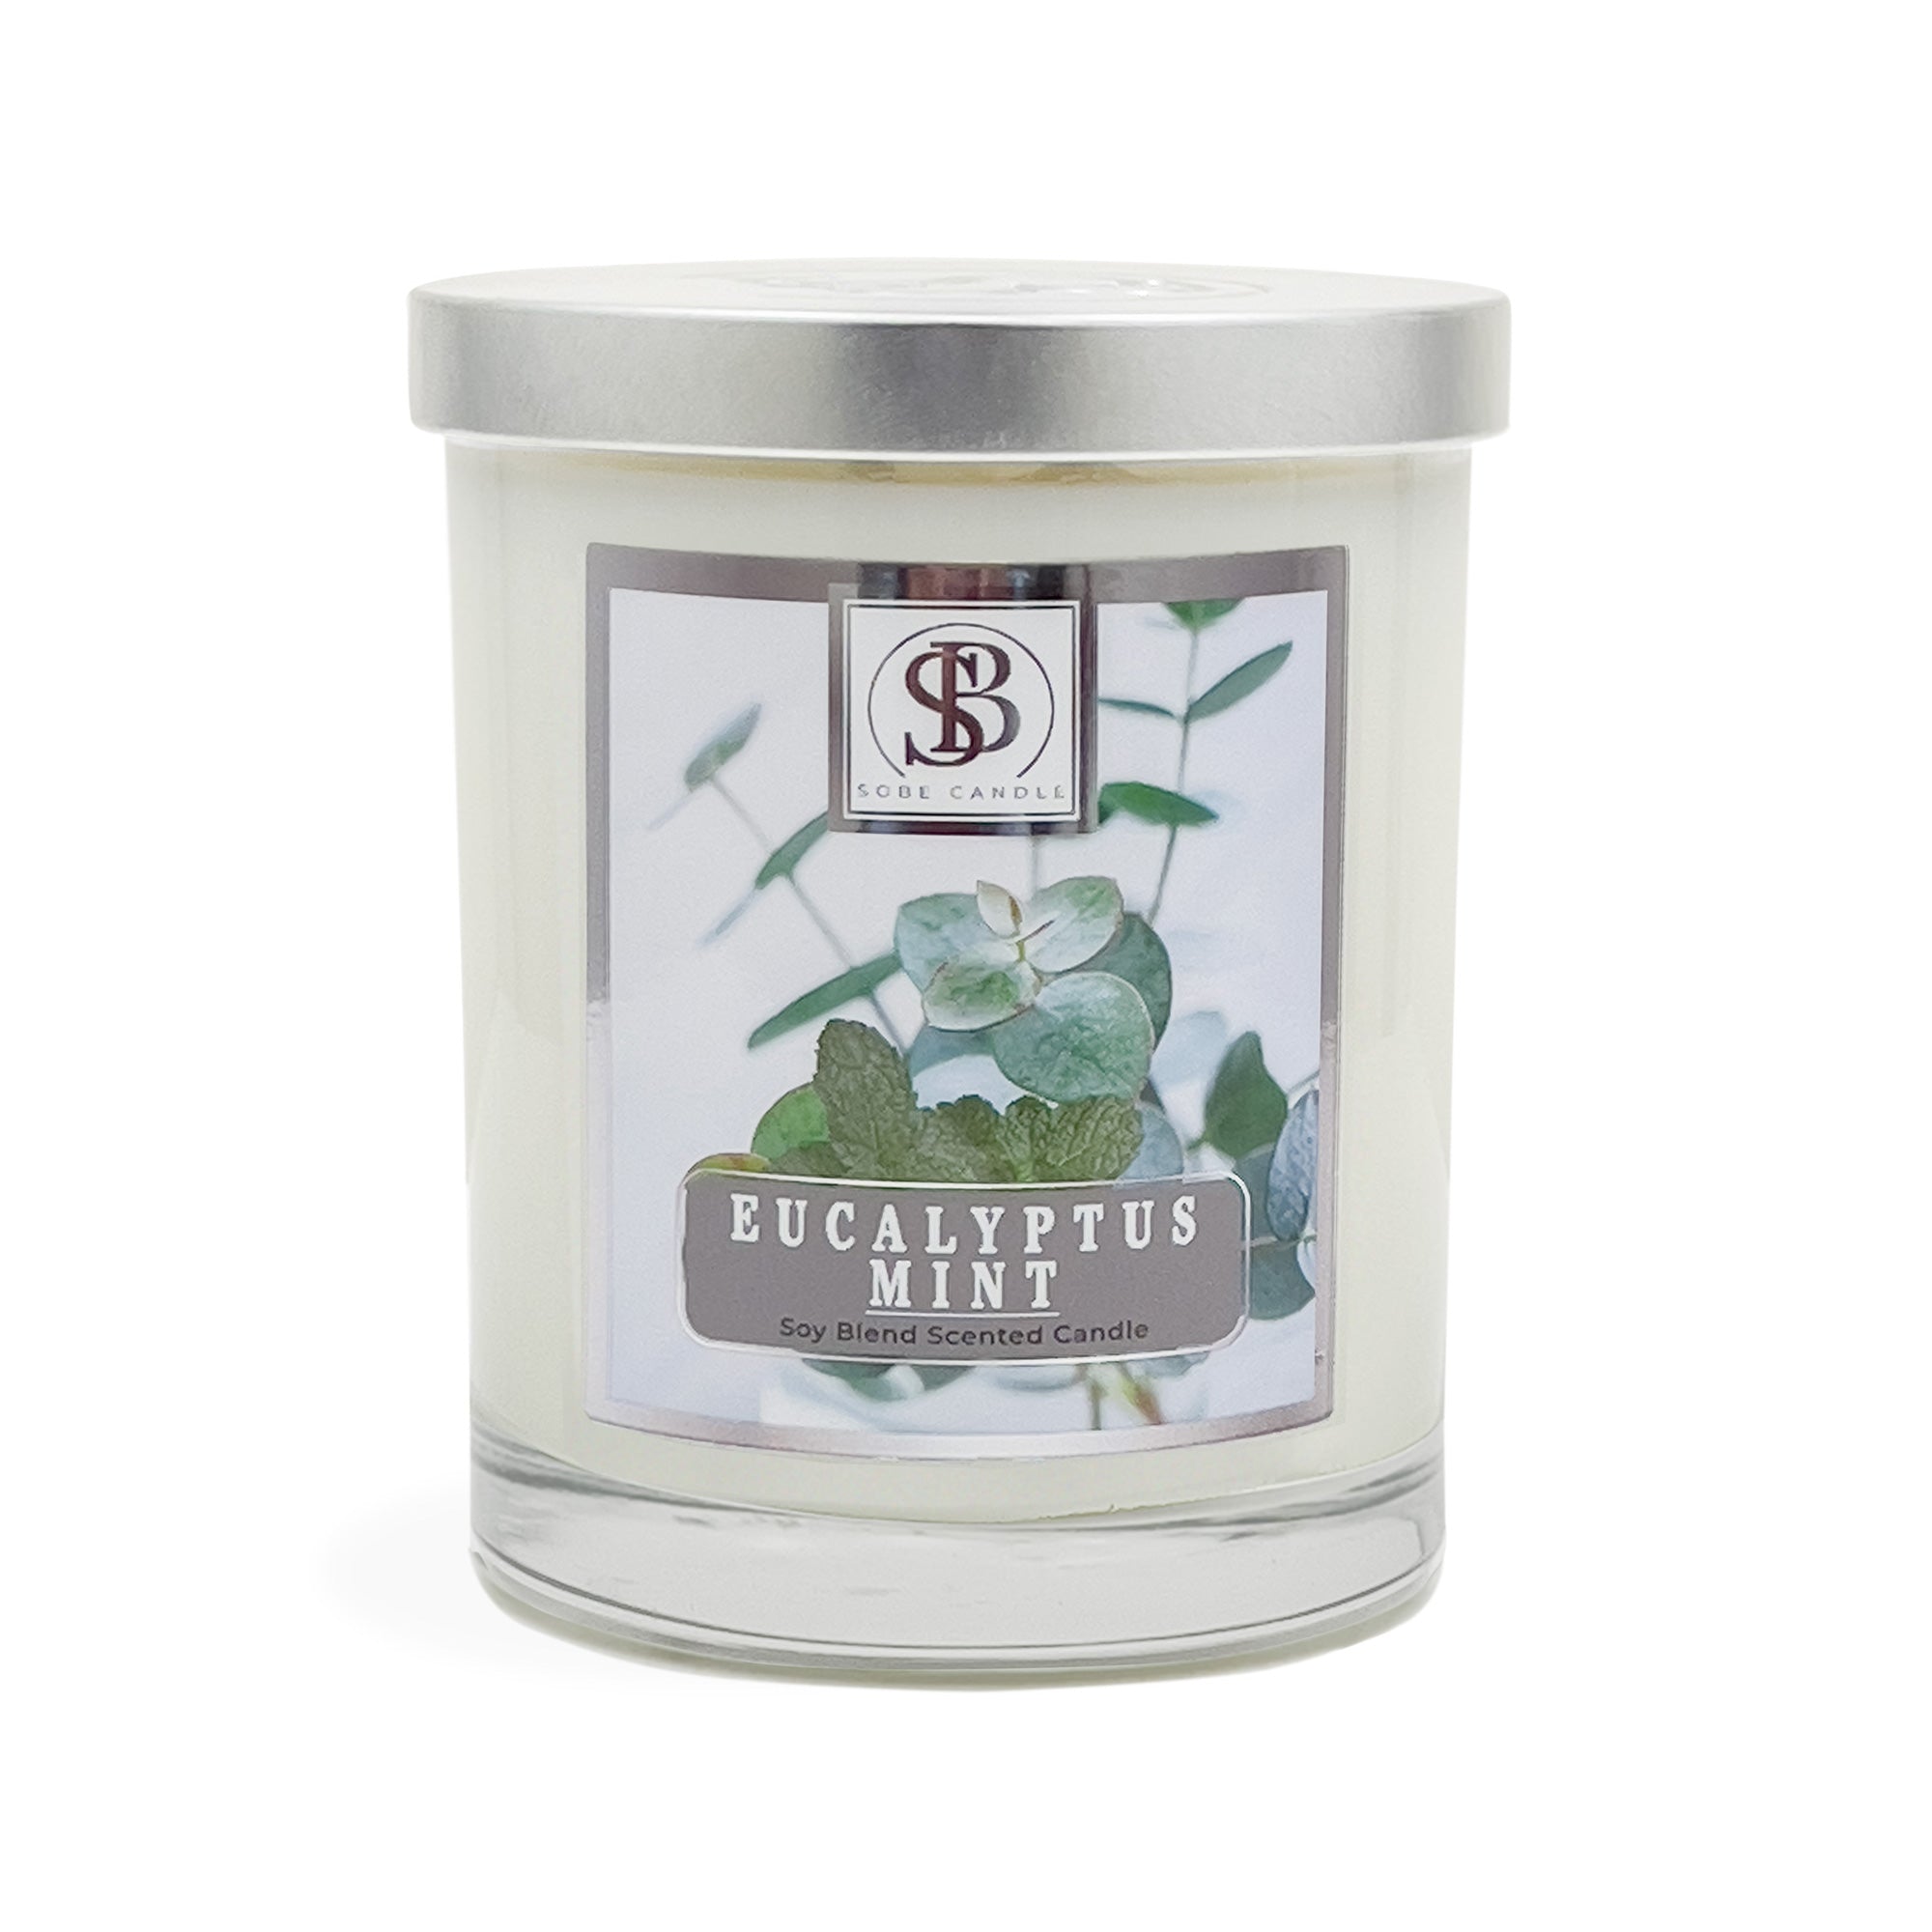 EUCALYPTUS MINT | Soy Scented Candle 11 oz